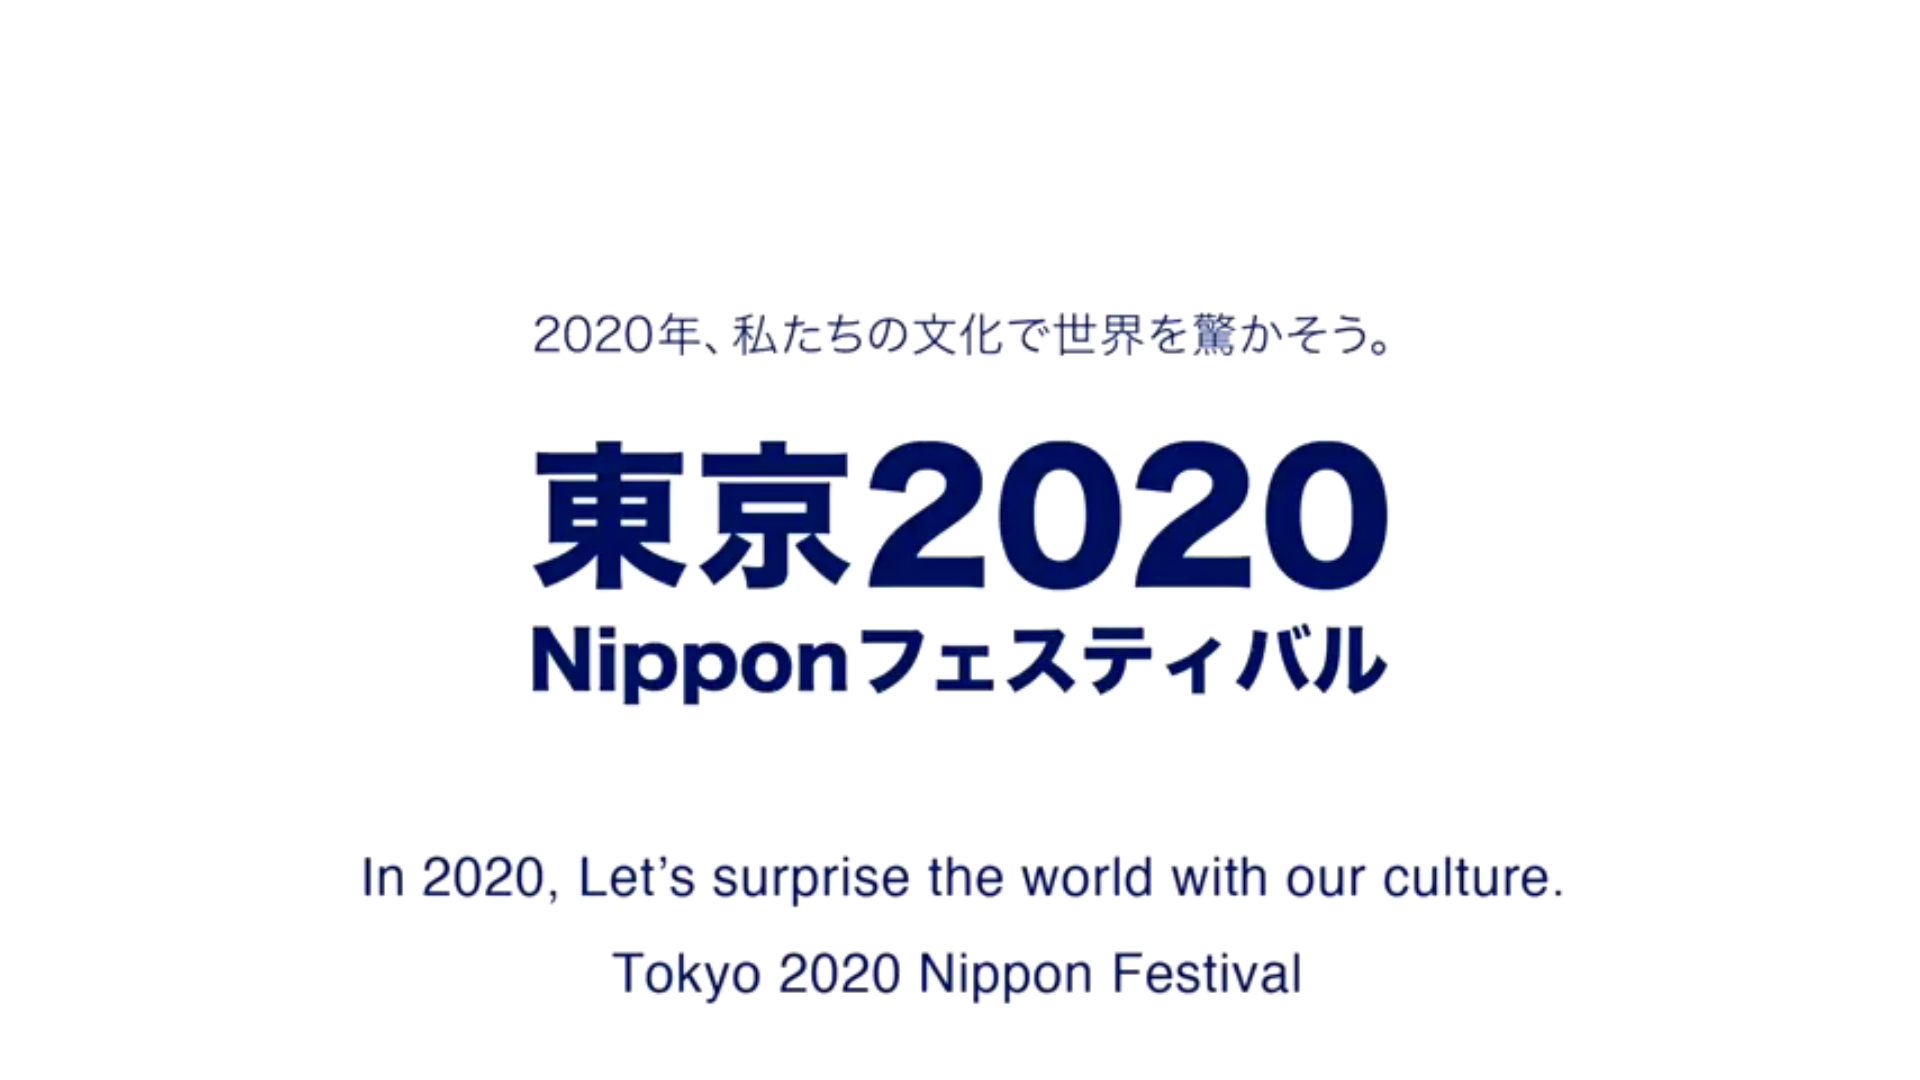 Tokyo 2020 hope the festival will promote Japanese culture at home and around the world ©Tokyo 2020 